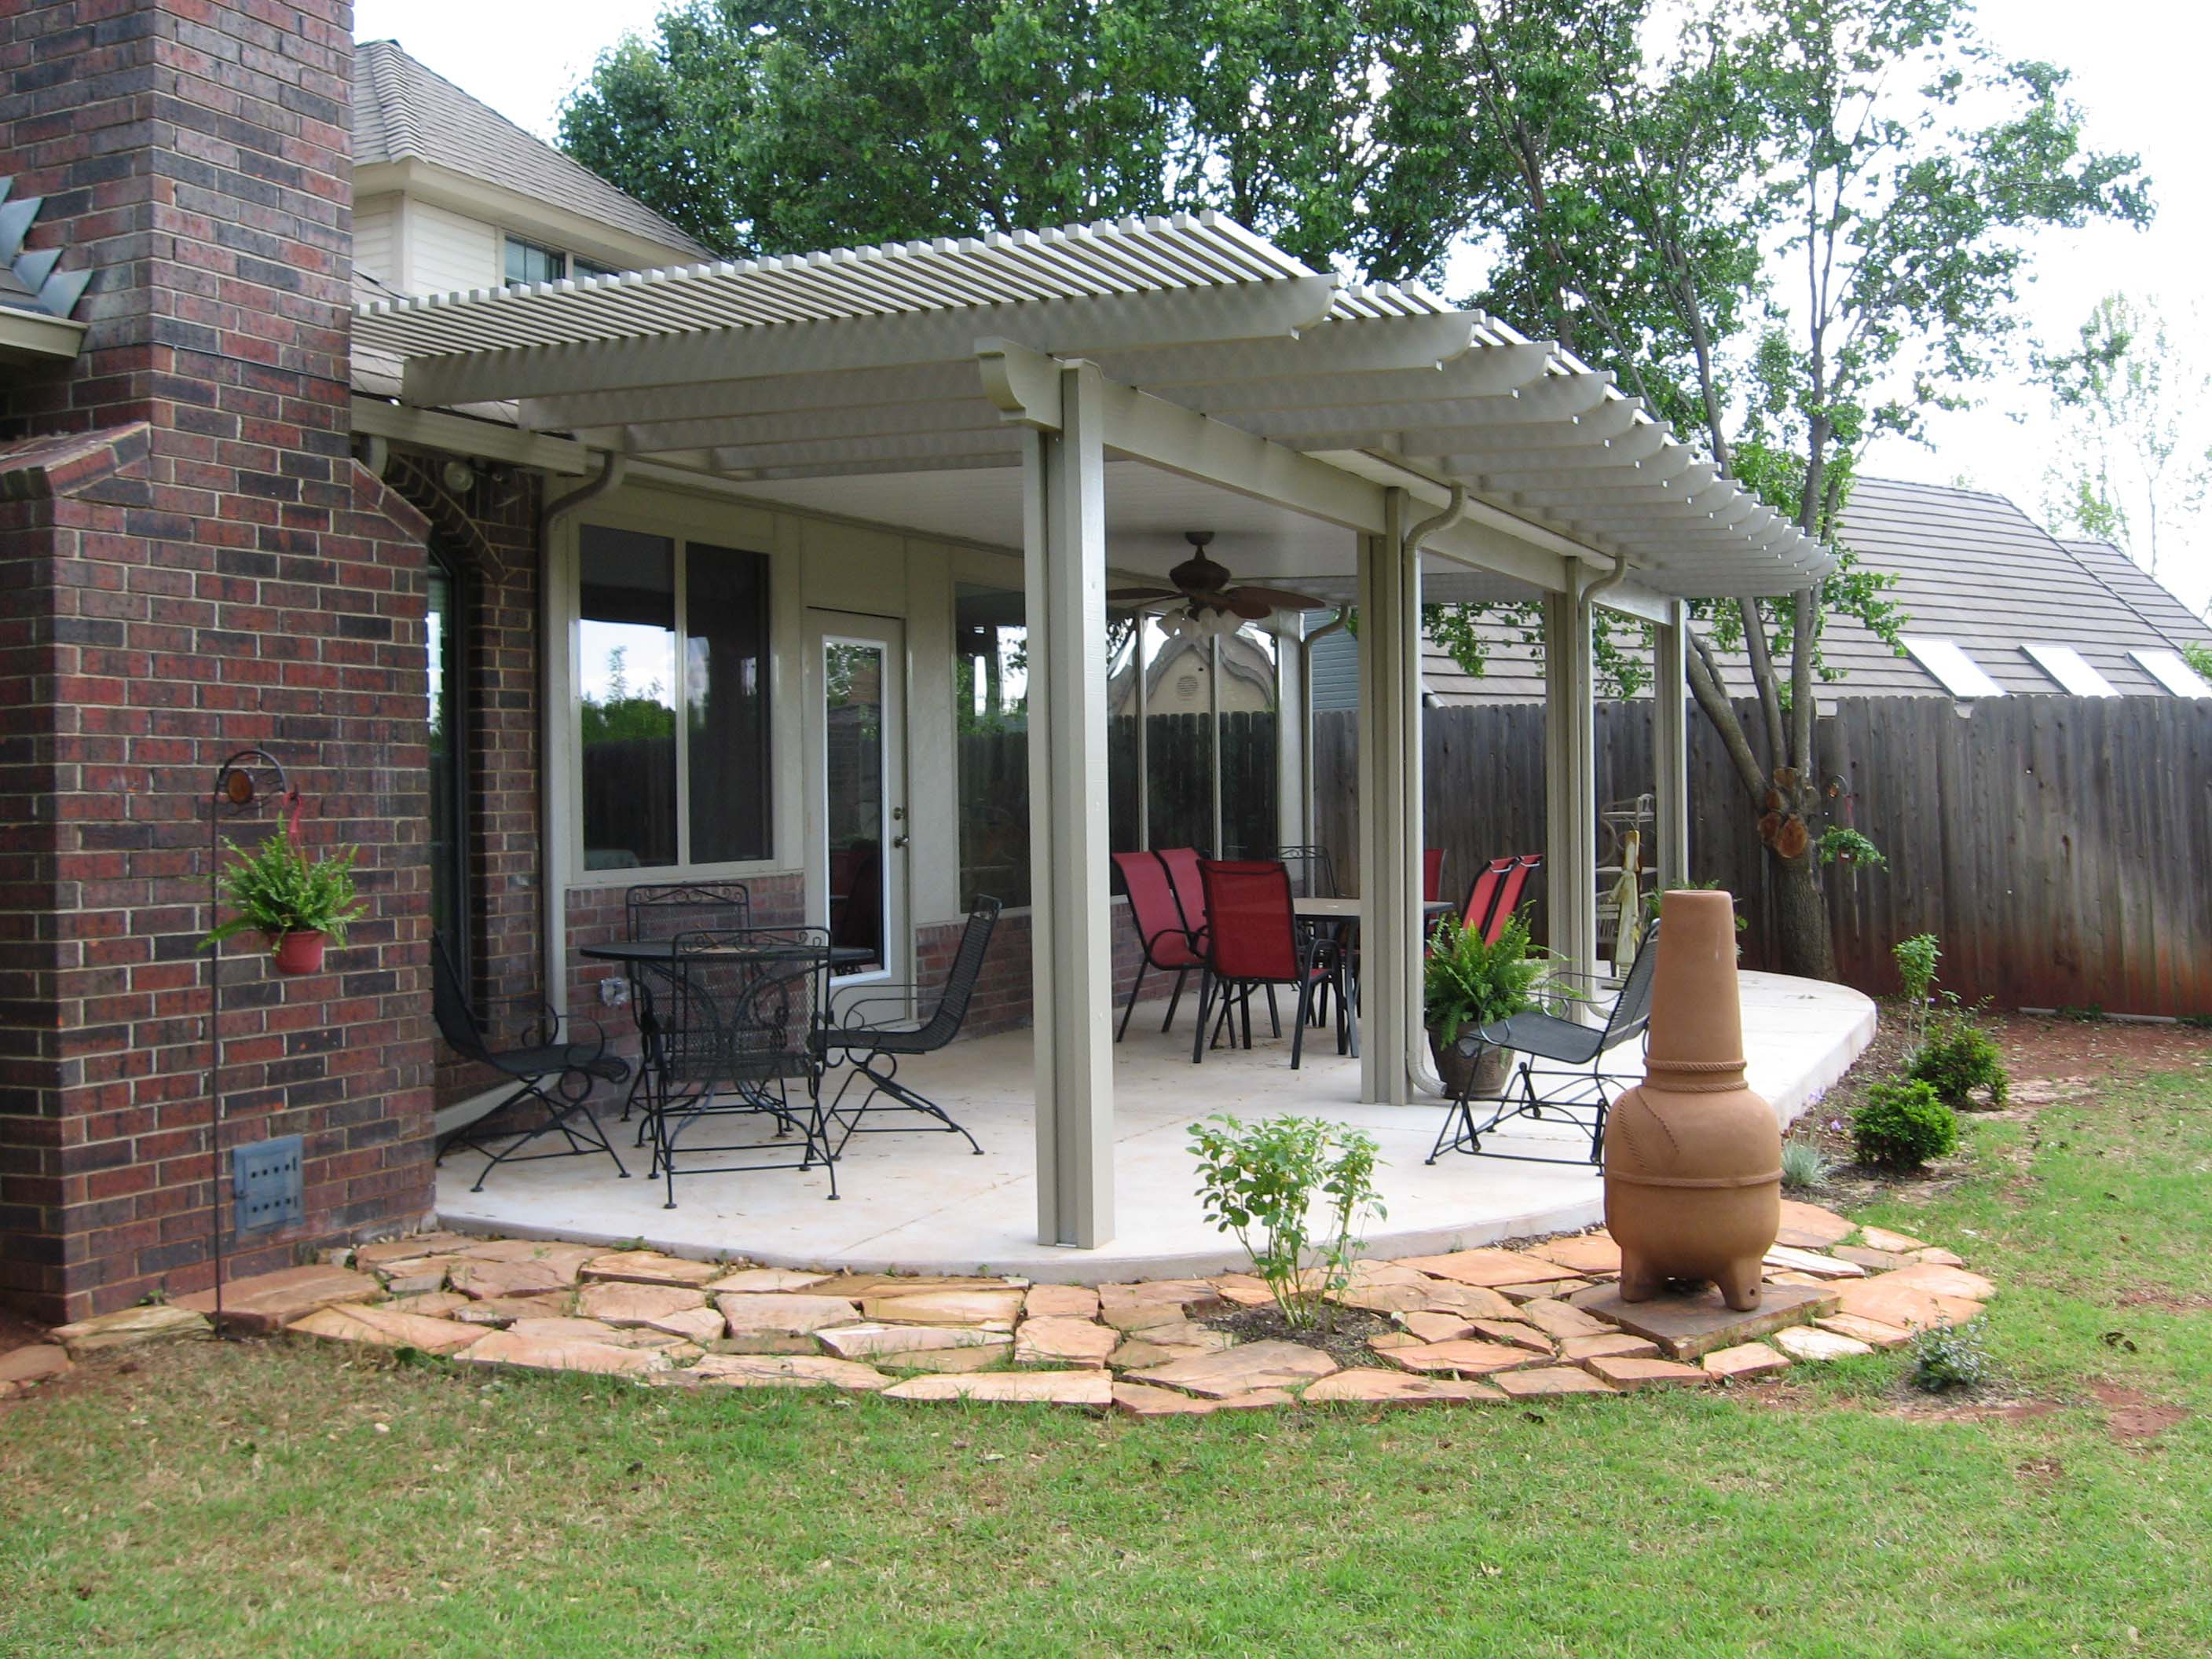 All Aluminum Patio Covers And Awnings Contractor In Tacoma intended for proportions 2816 X 2112